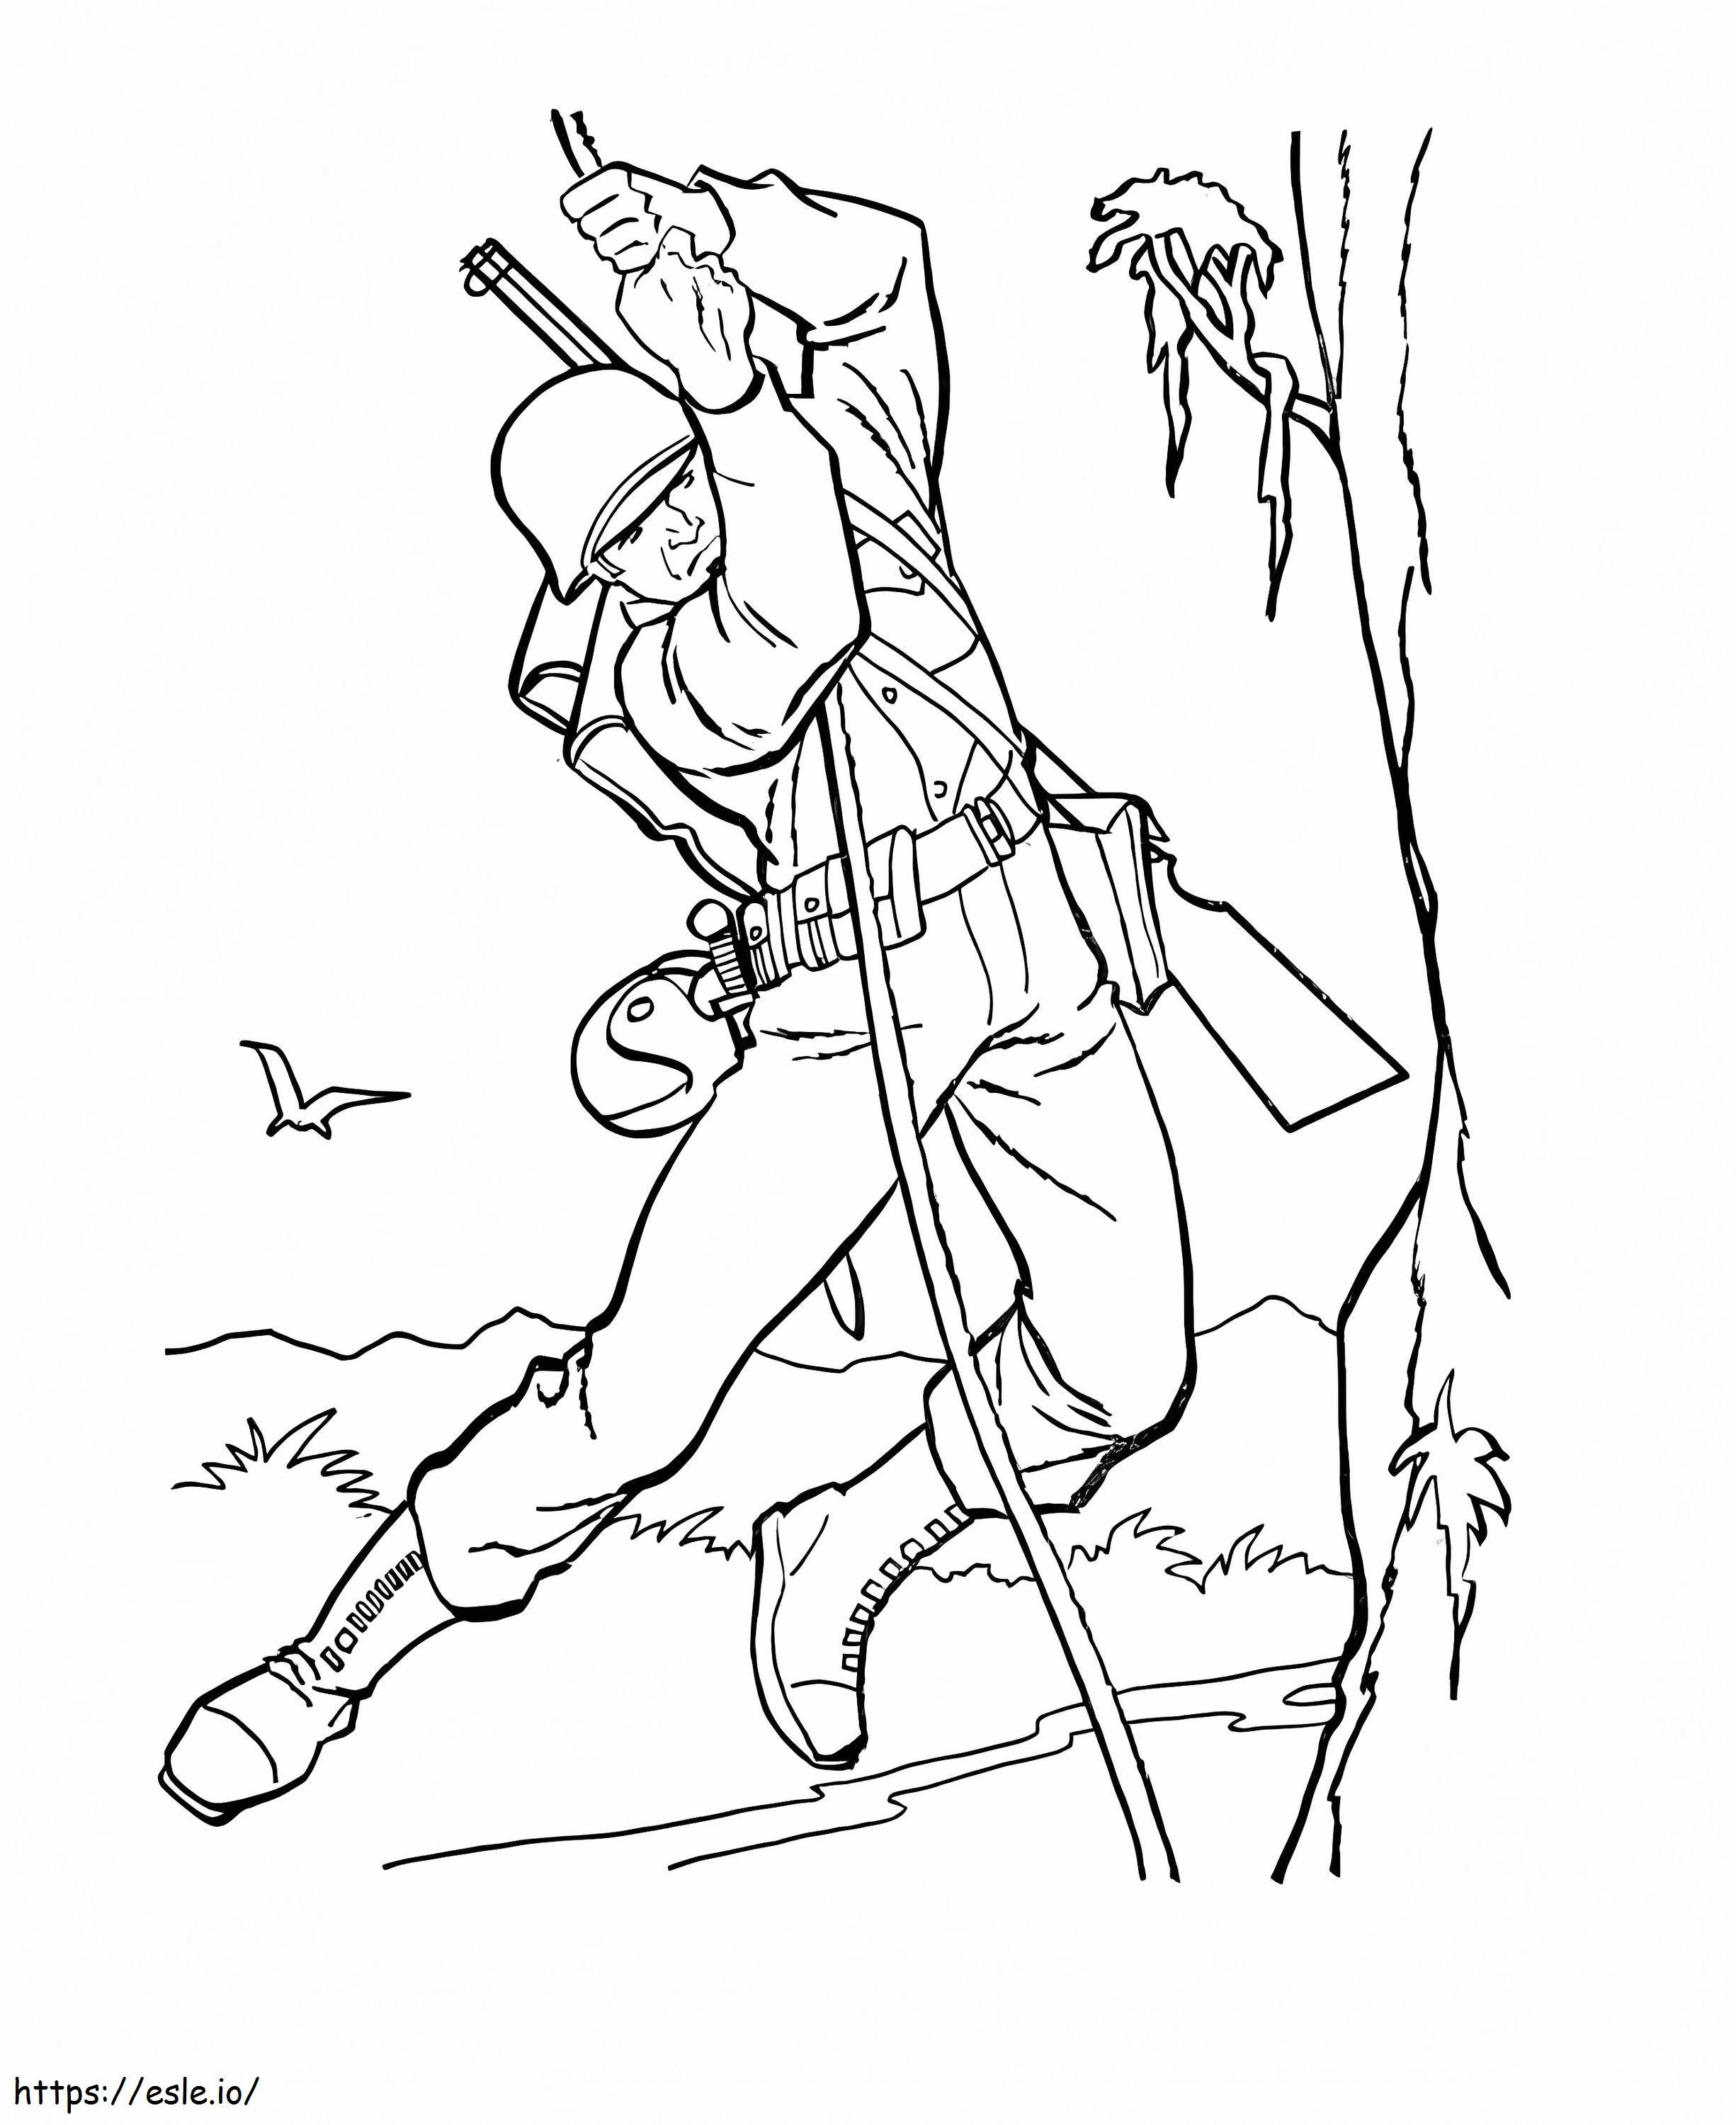 Soldier Climbing coloring page